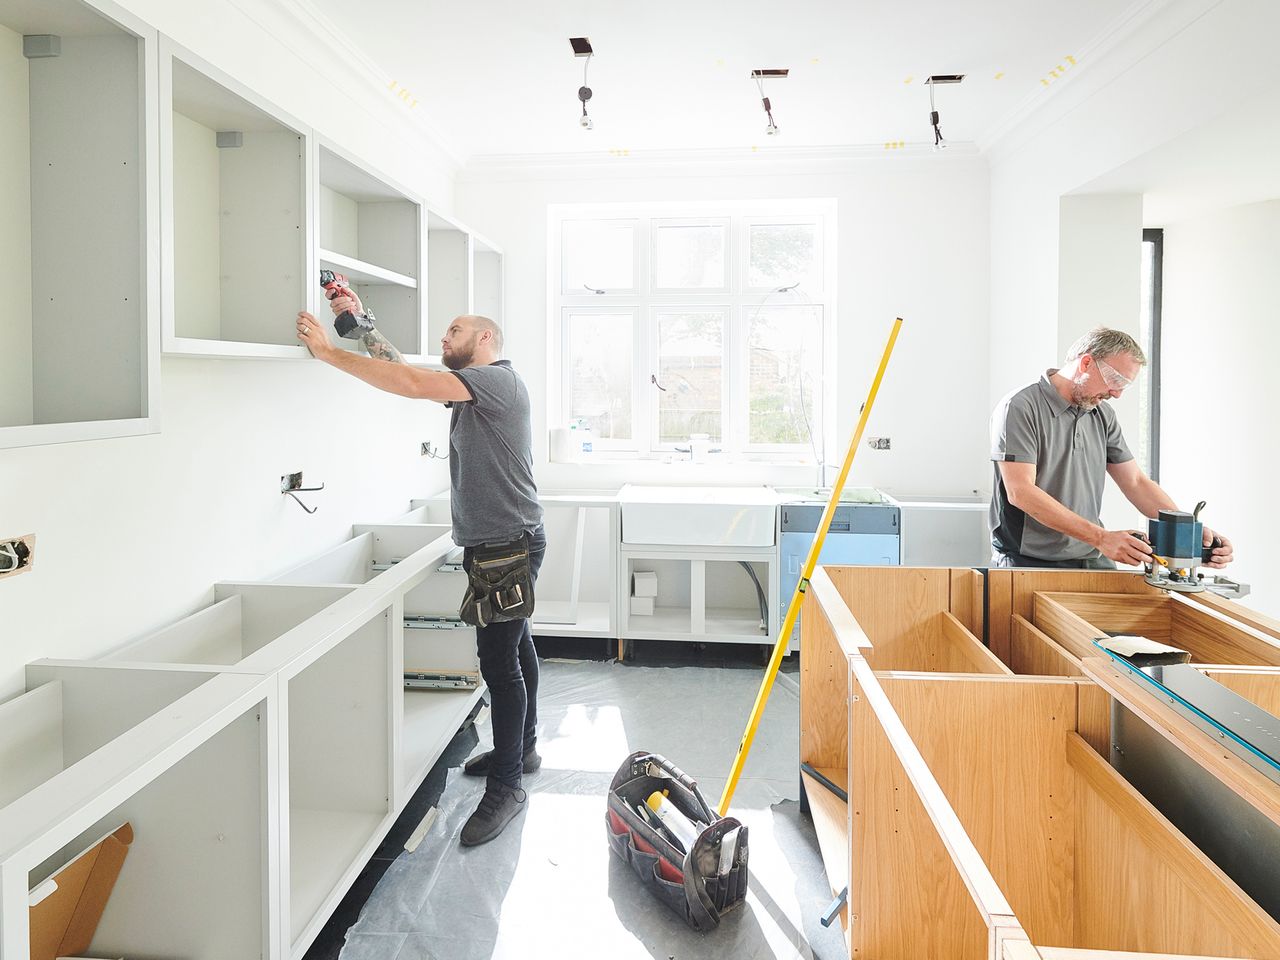 Two men sharing tips and tricks while renovating a kitchen in a new home.